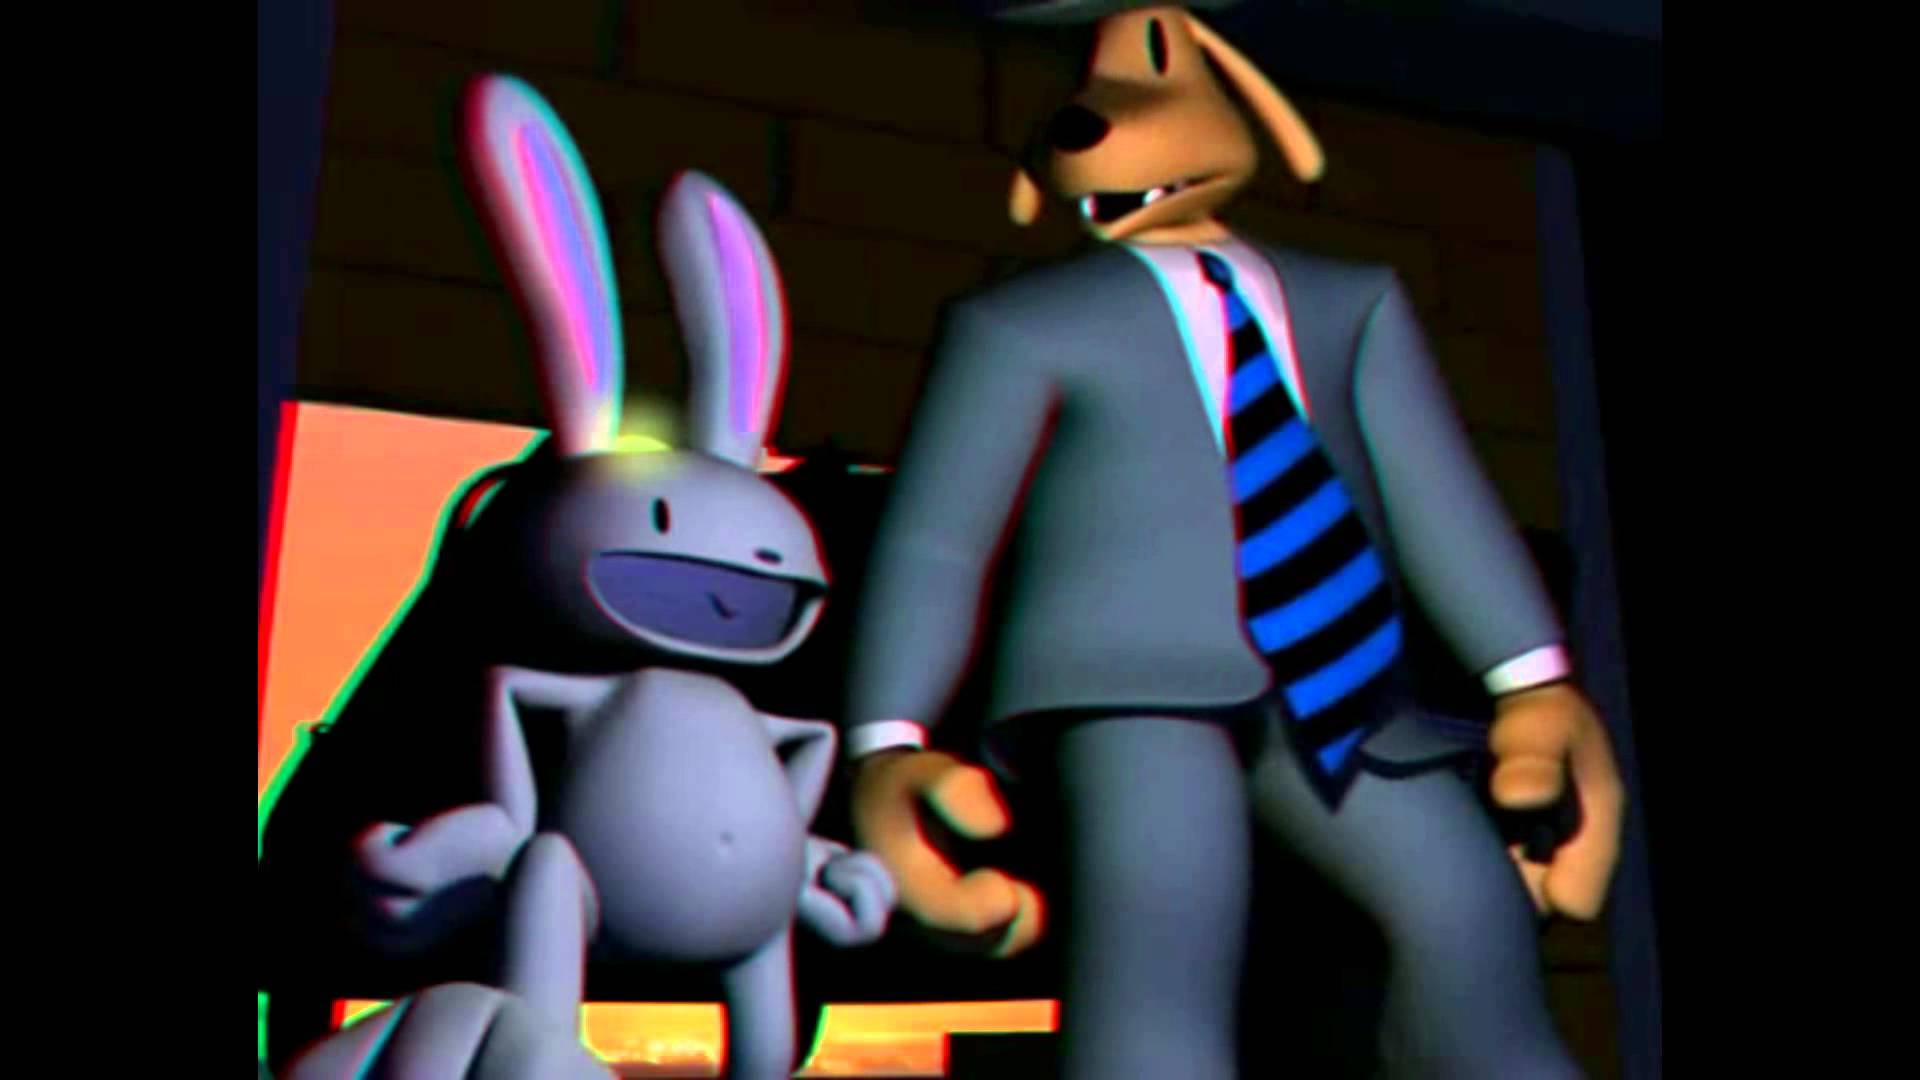 Sam & Max 3D Intro Anaglyph Red/Cyan - YouTube